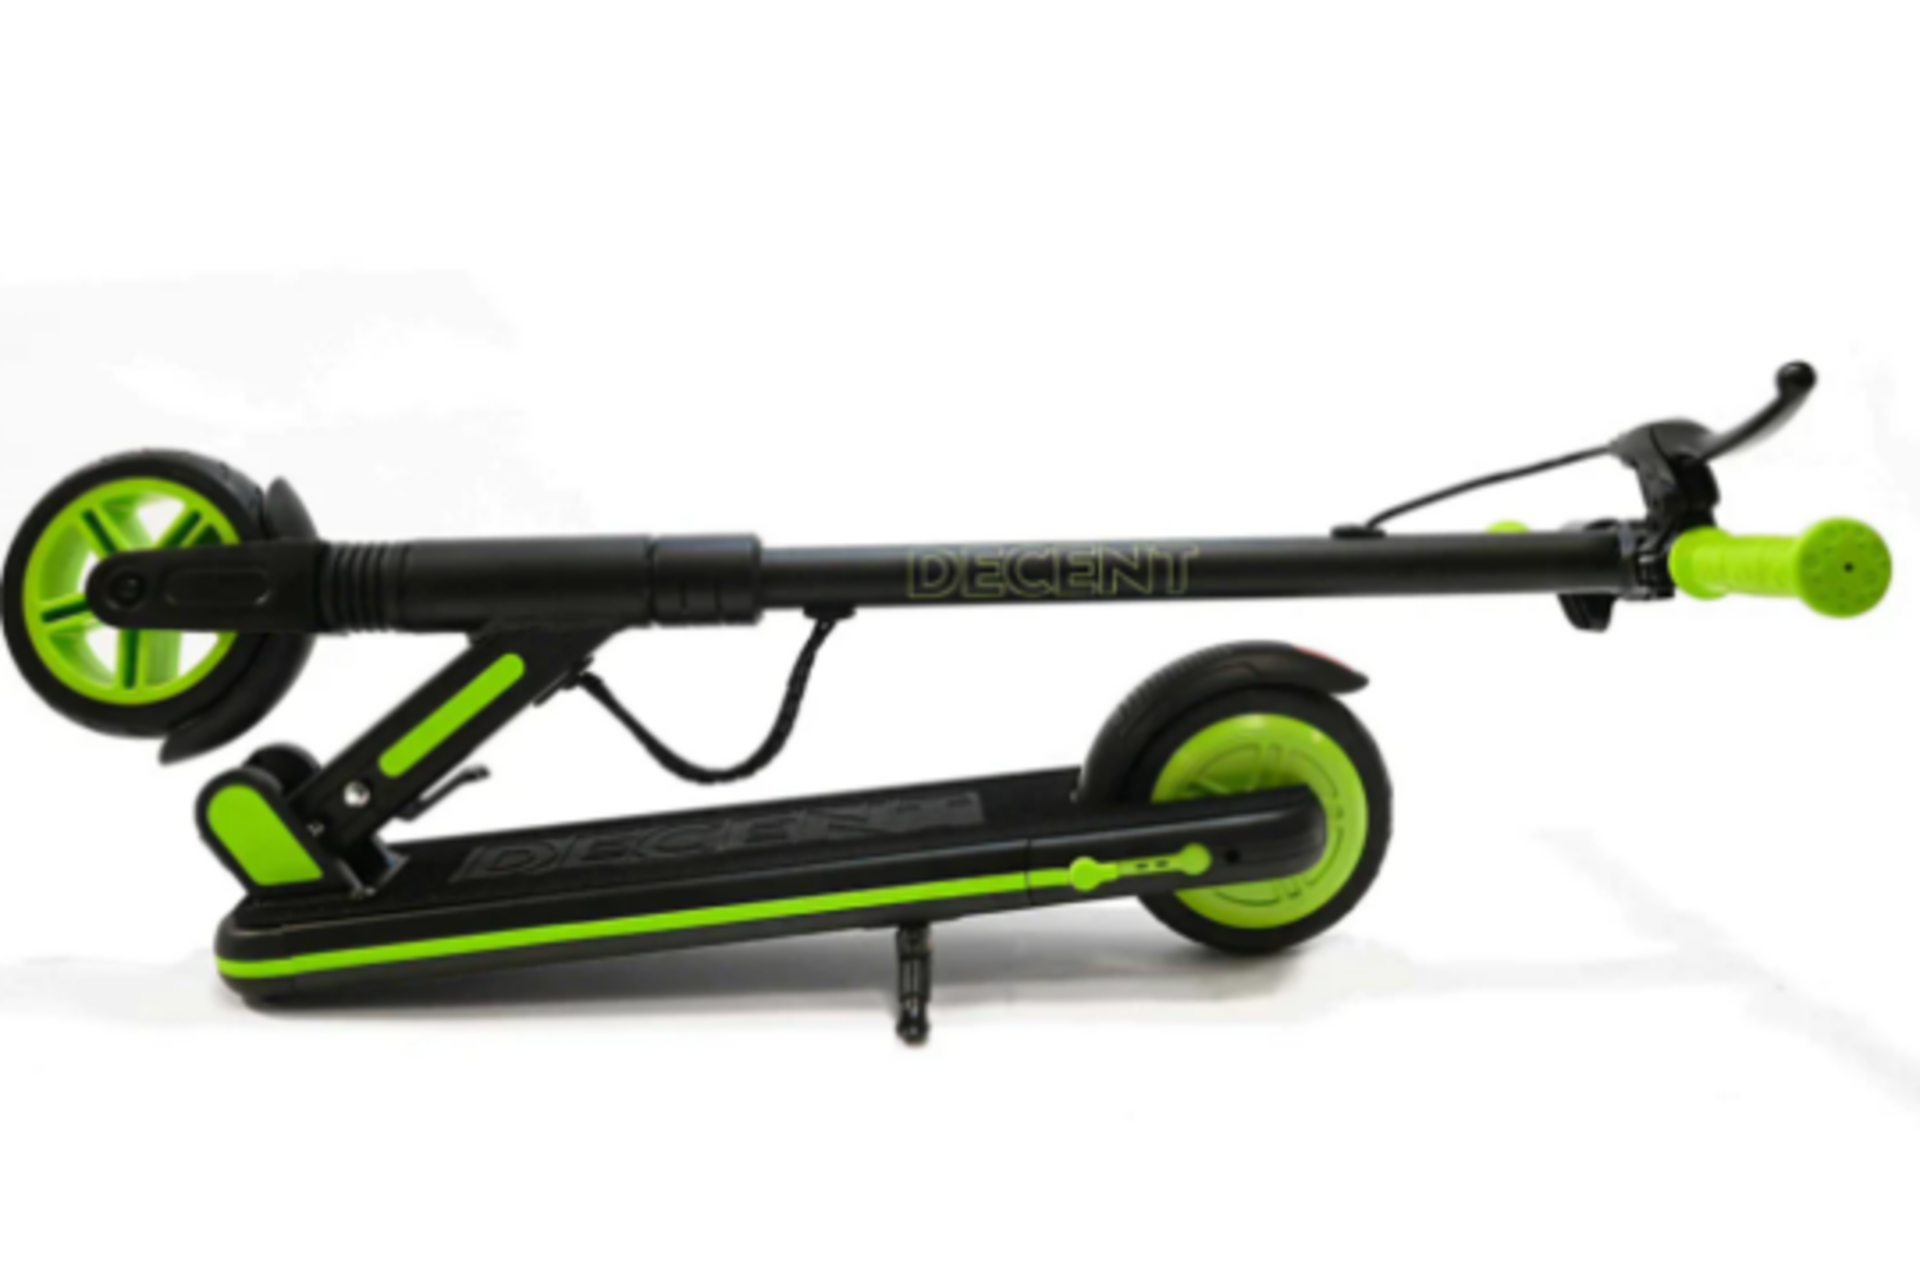 Trade Lot 10 x New &Boxed DECENT Kids Electric Scooter - Blue/Green. Let your kids zip around in - Image 2 of 3